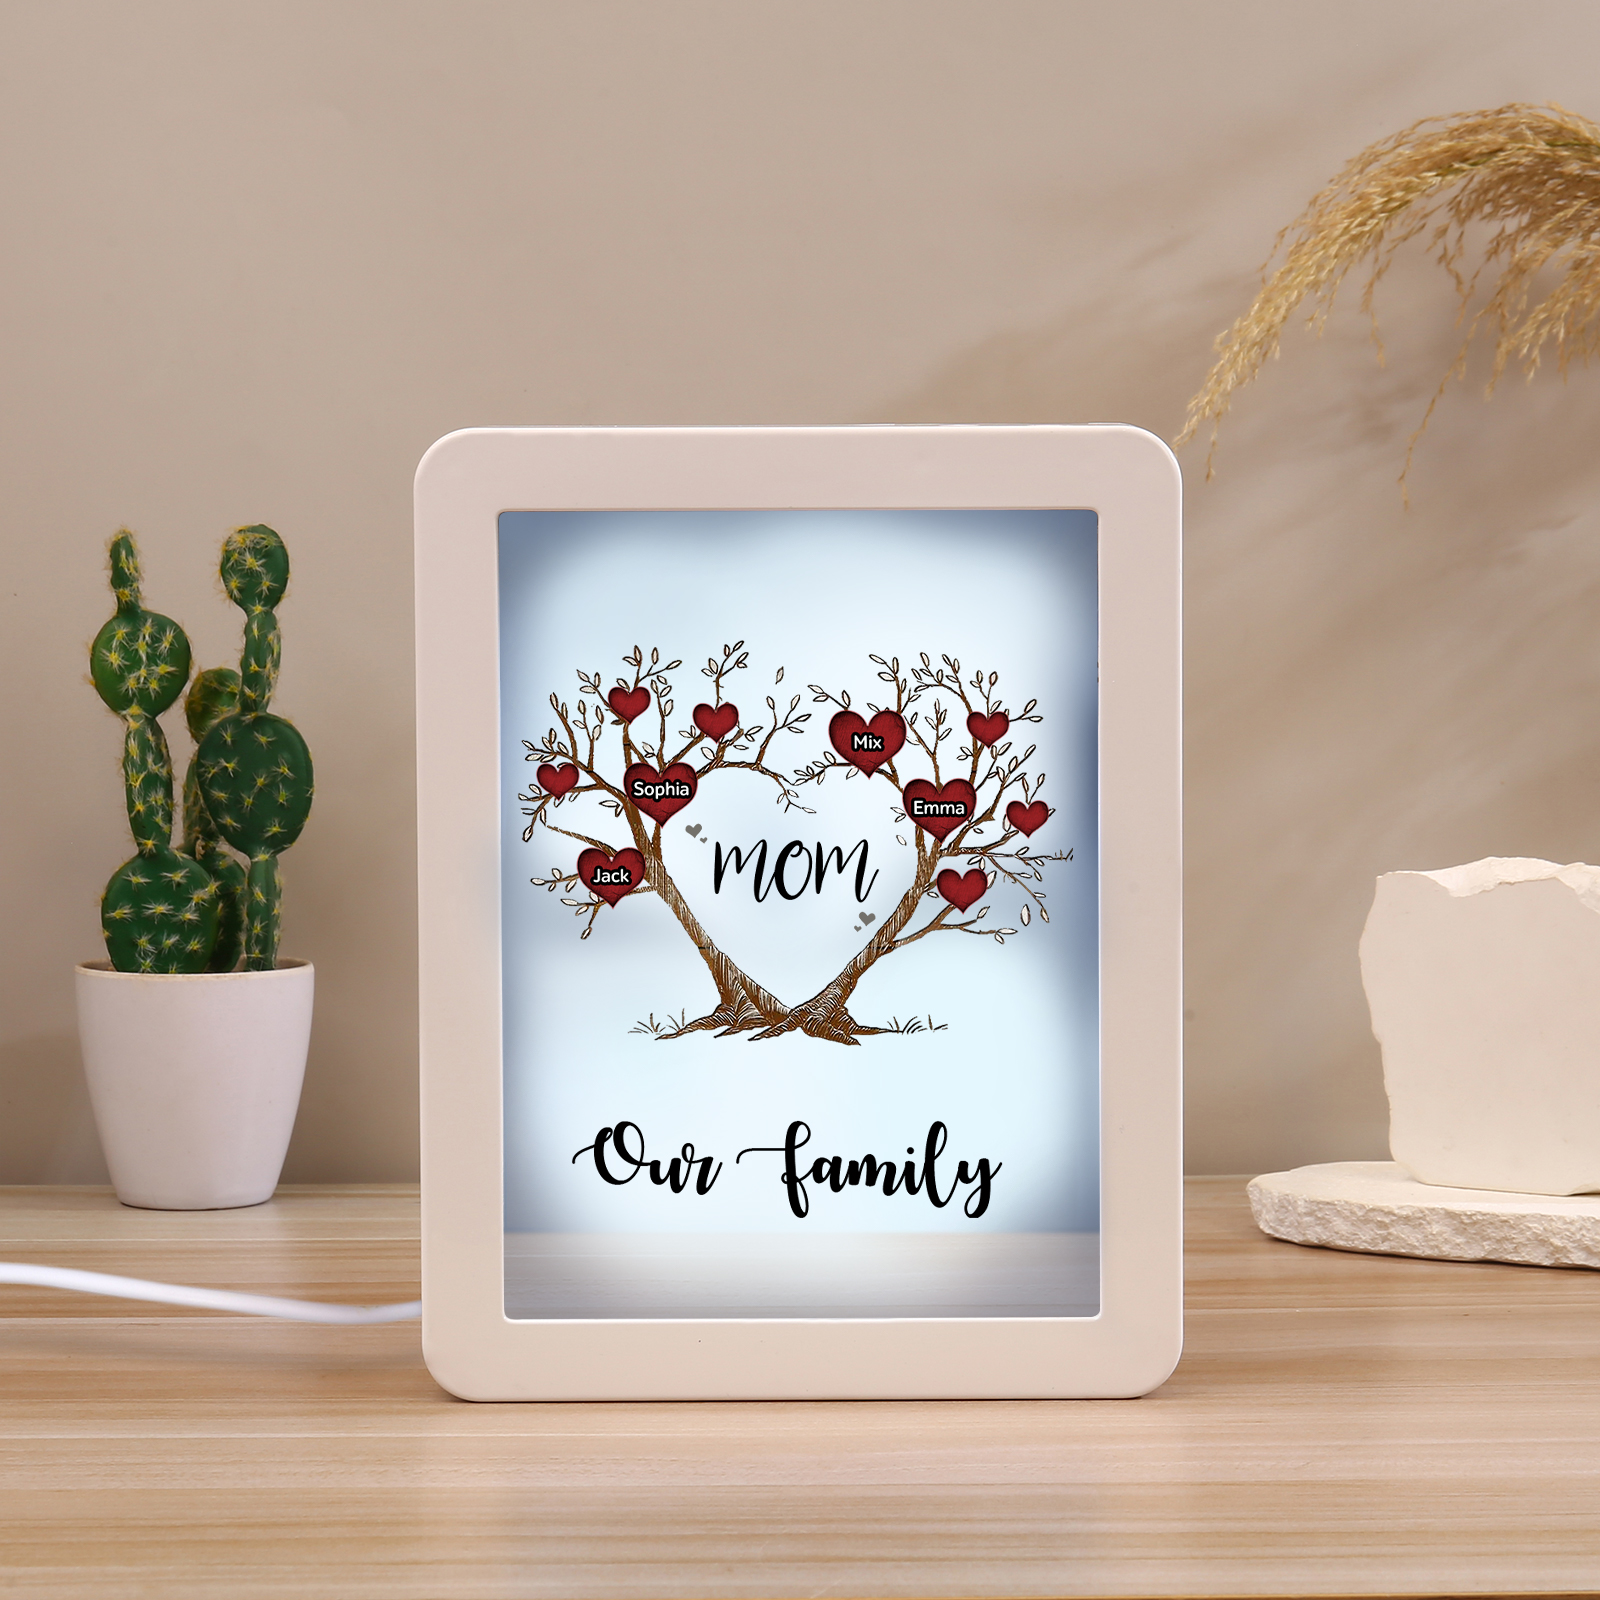 4 Names - Personalized Home Mirror Photo Frame Night Light Insert/Rechargeable Custom Text LED Night Light Gift for Mom